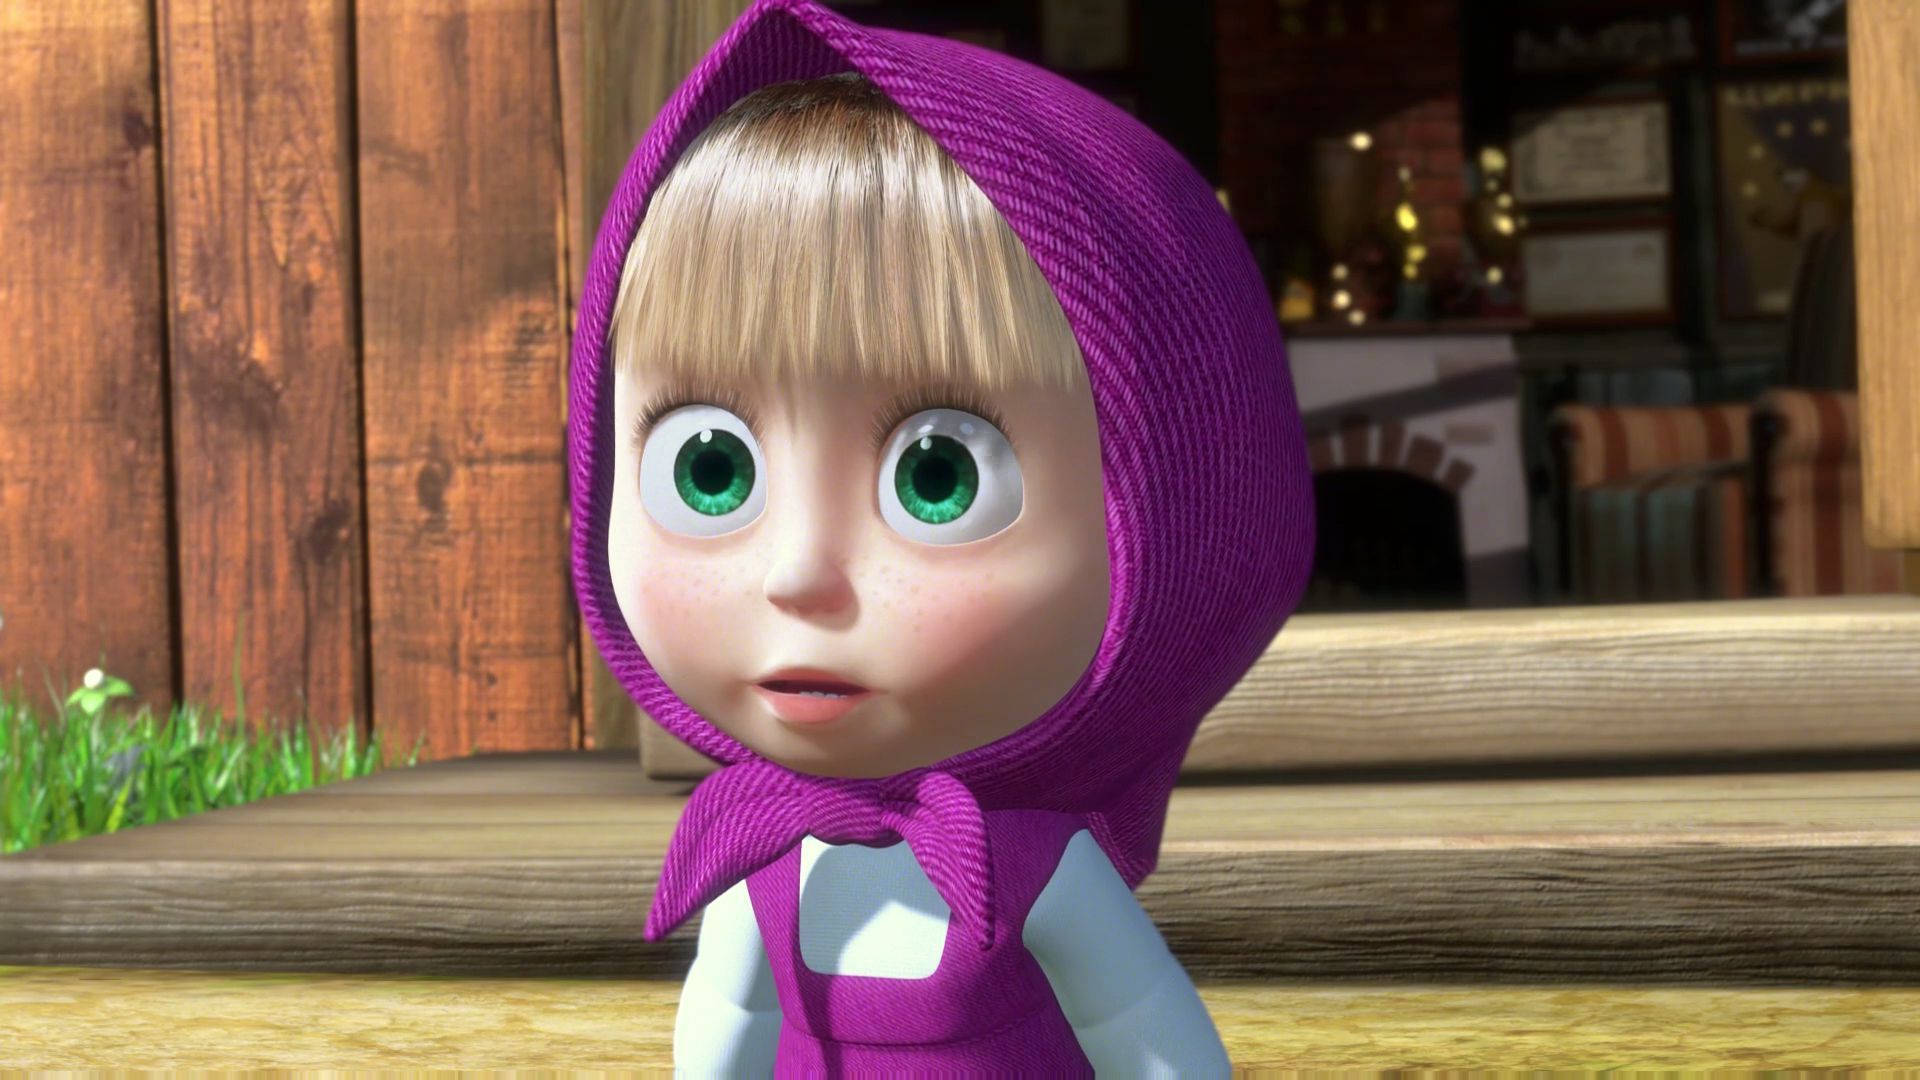 14158 download wallpaper masha and the bear, cartoon, children screensavers and pictures for free